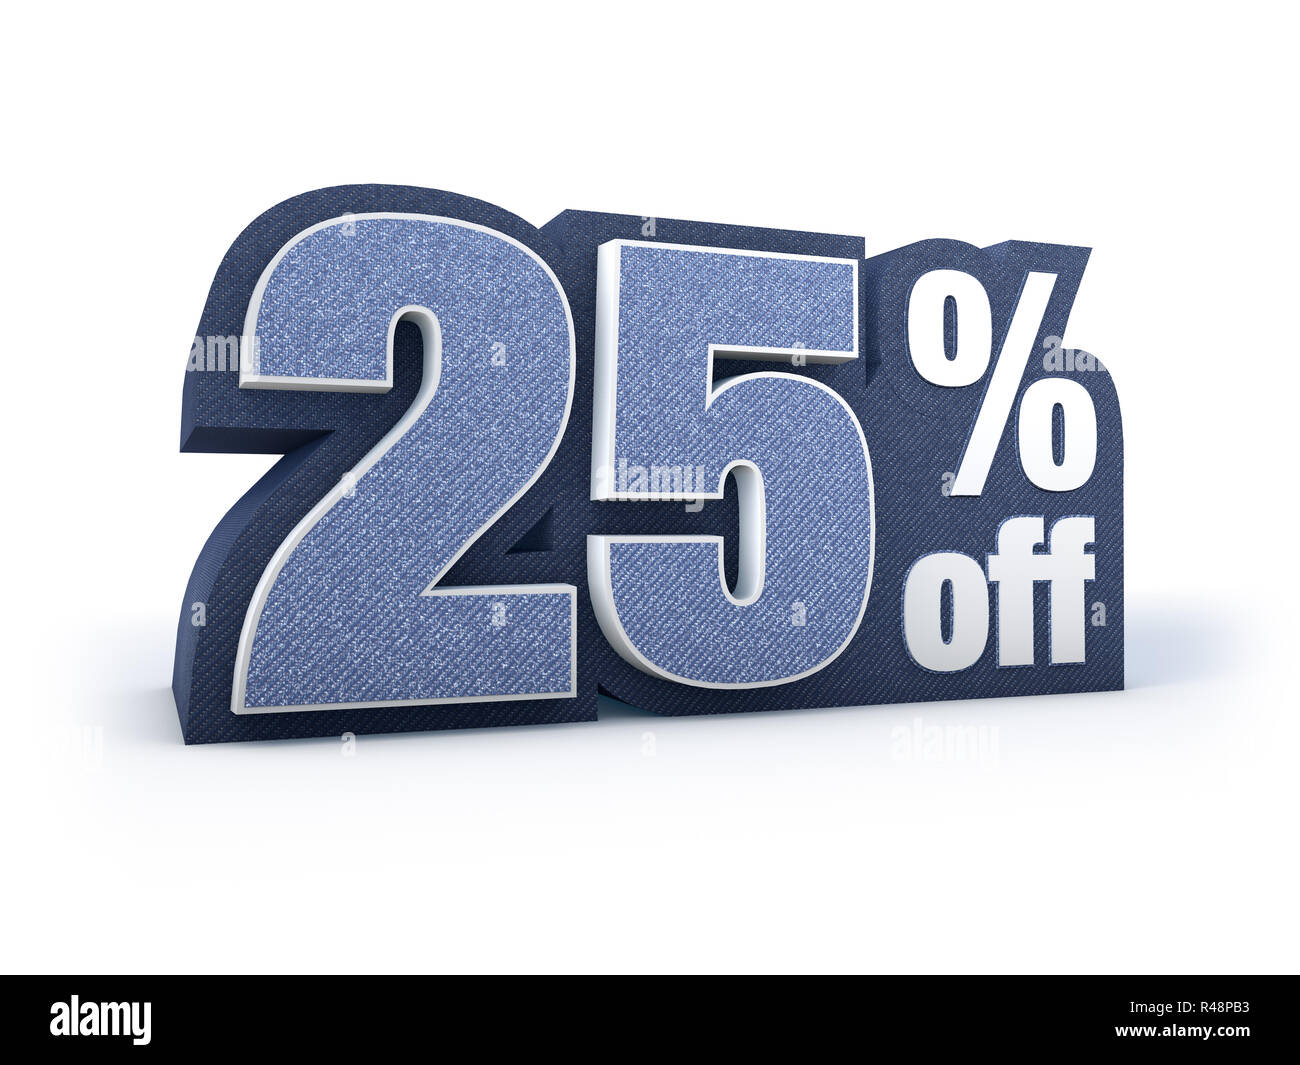 25 percent off denim styled discount price sign Stock Photo